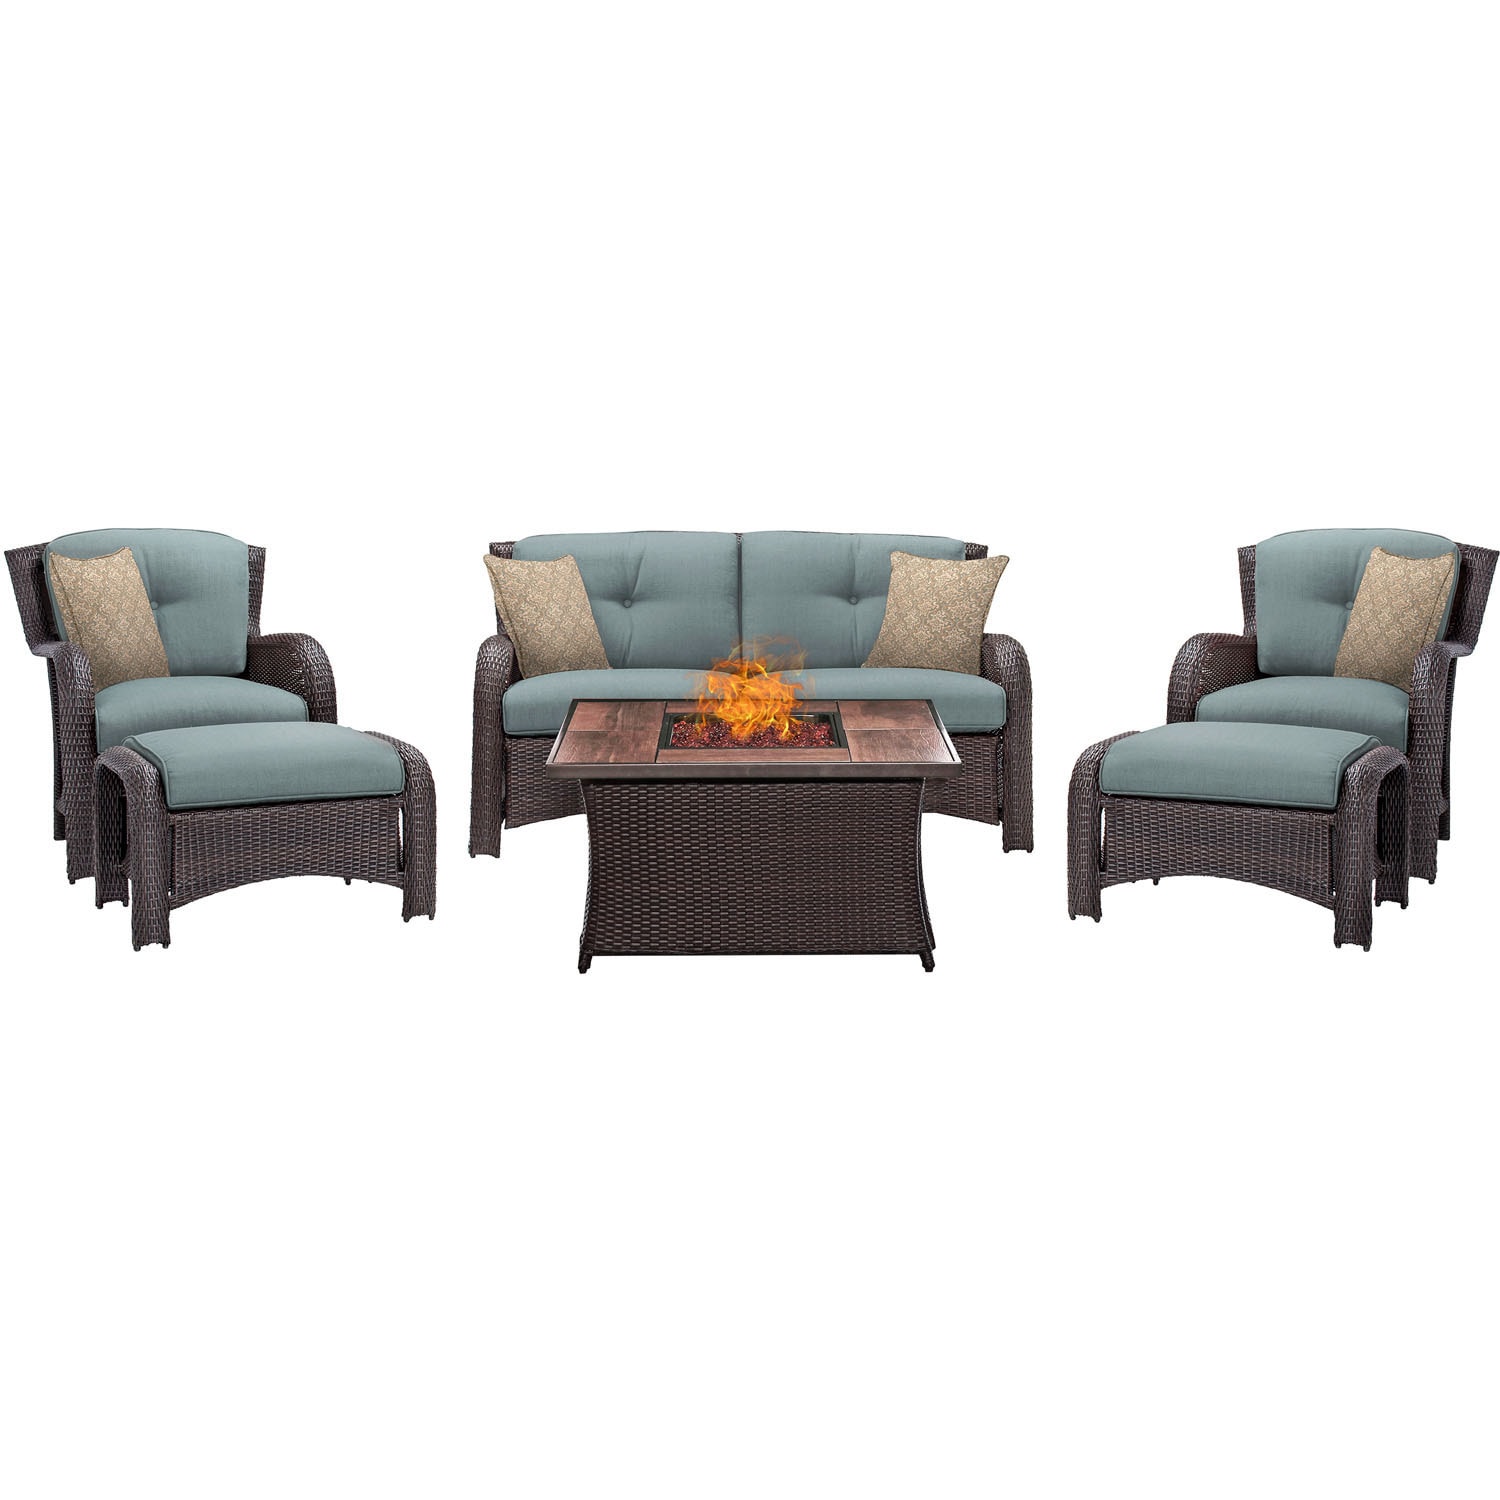 Hanover Outdoor Strathmere 6-piece Lounge Set In Ocean Blue With Fire Pit Table